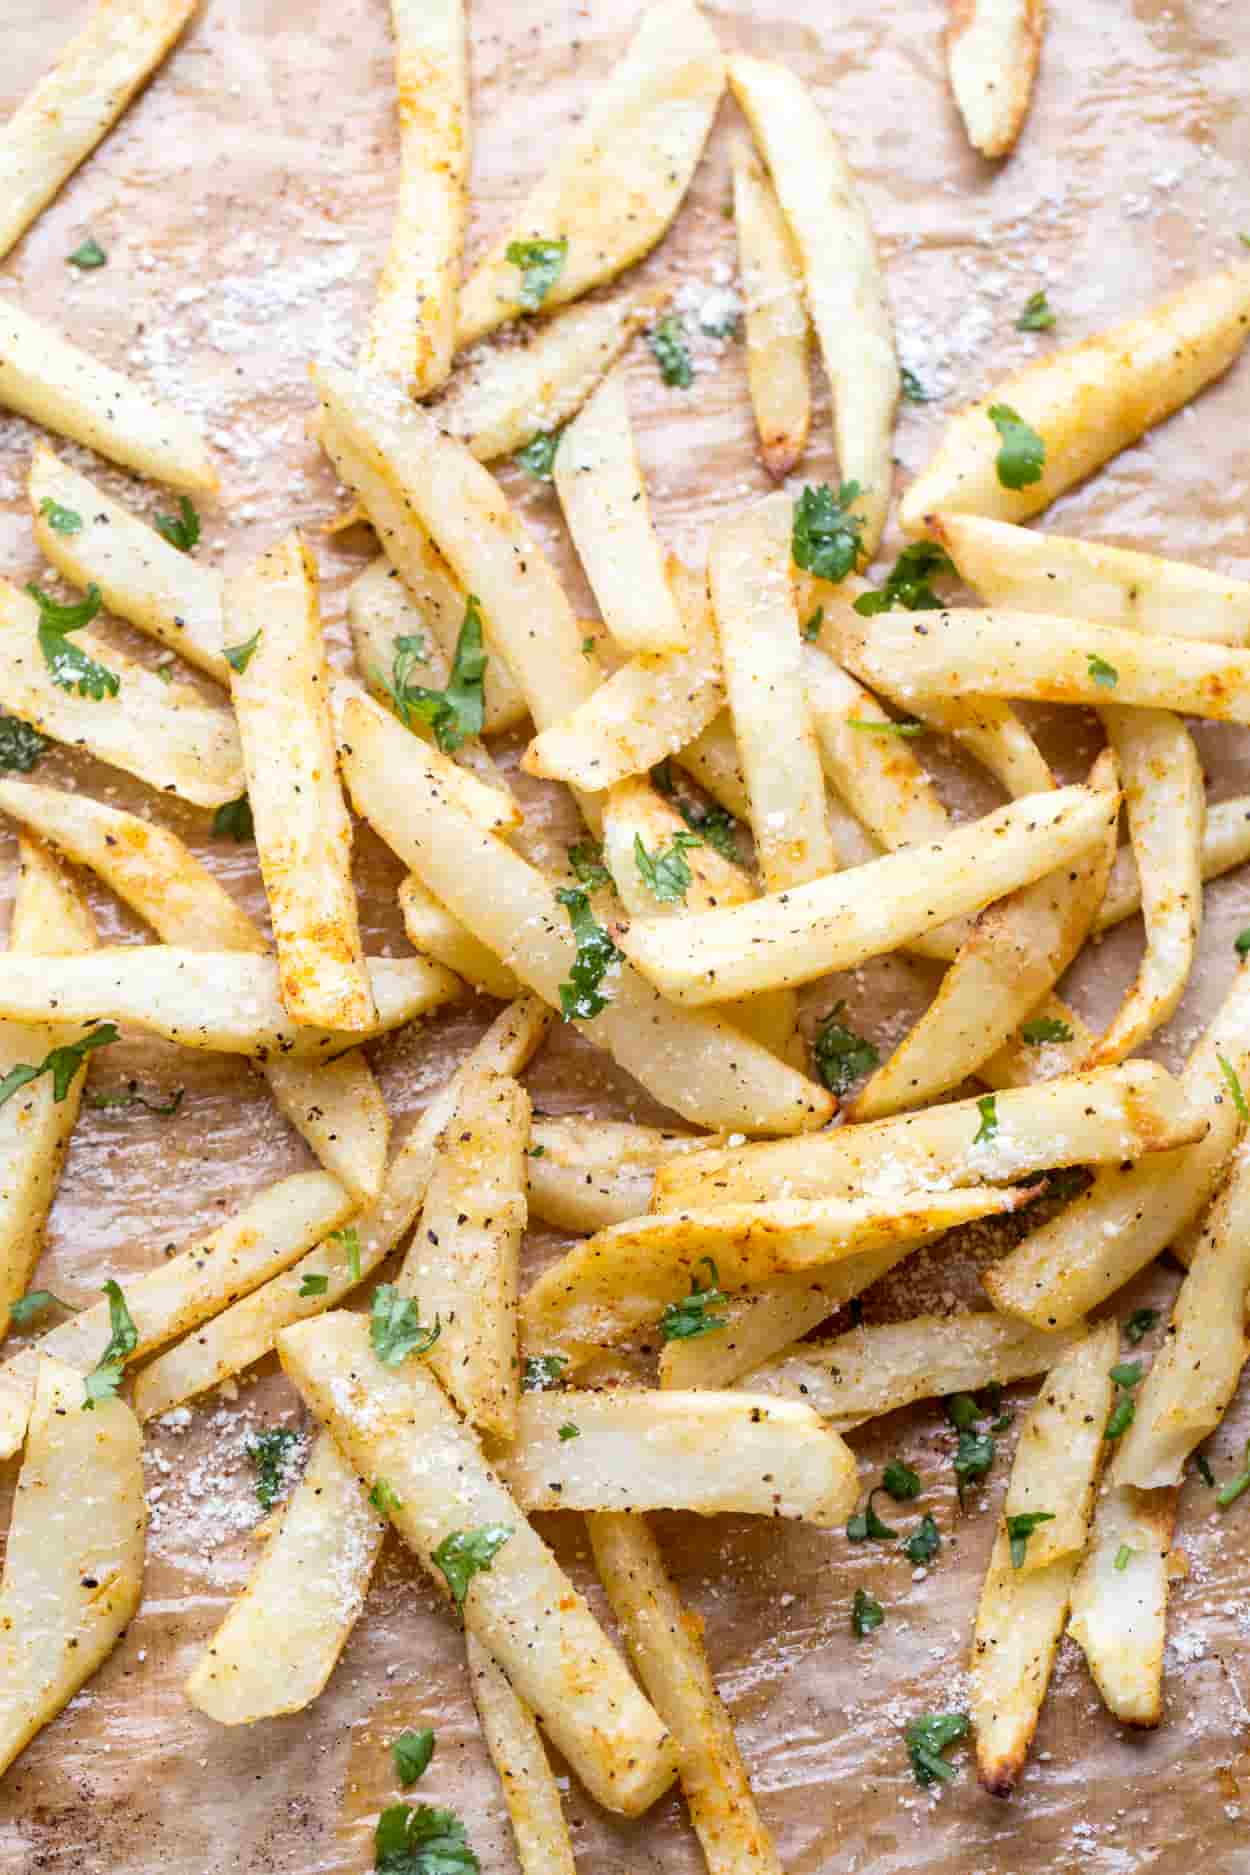 Baked French fries topped greens and parmesan cheese.